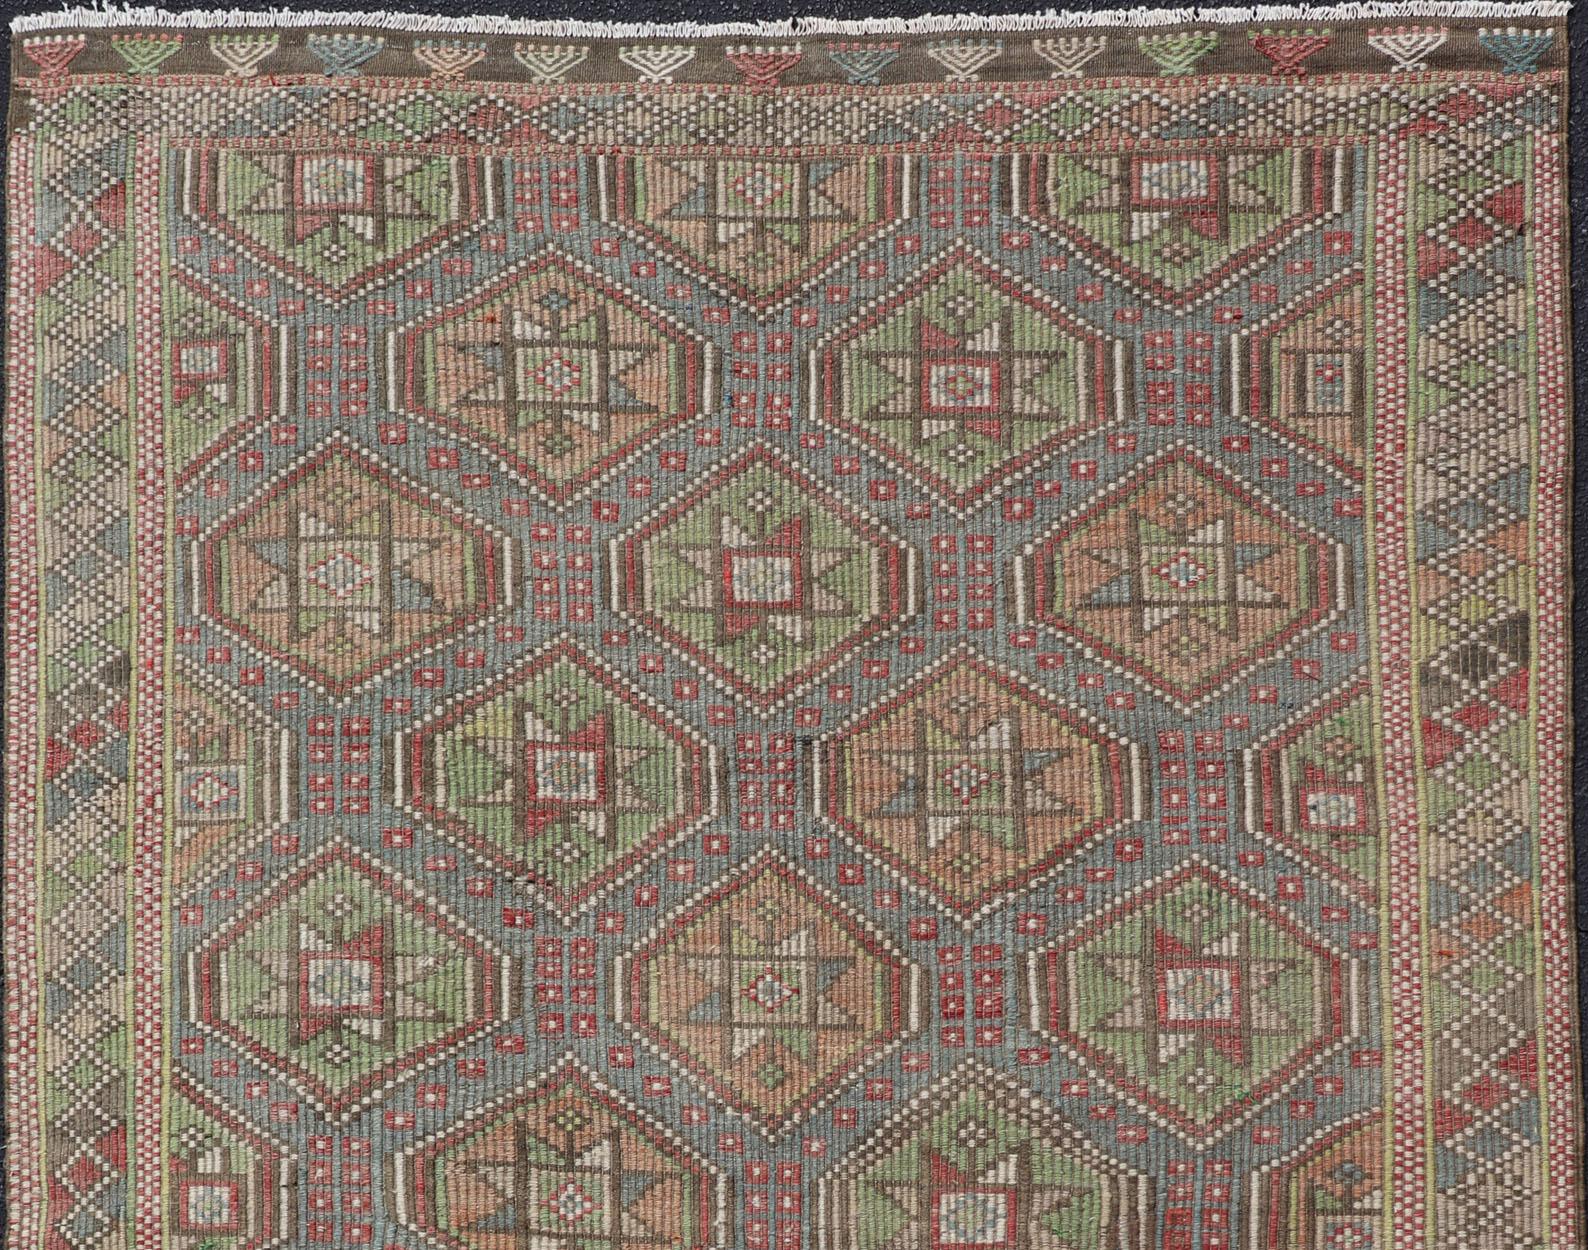 Colorful Vintage Turkish Flat-Weave Tribal Motif Kilim with Embroideries For Sale 3